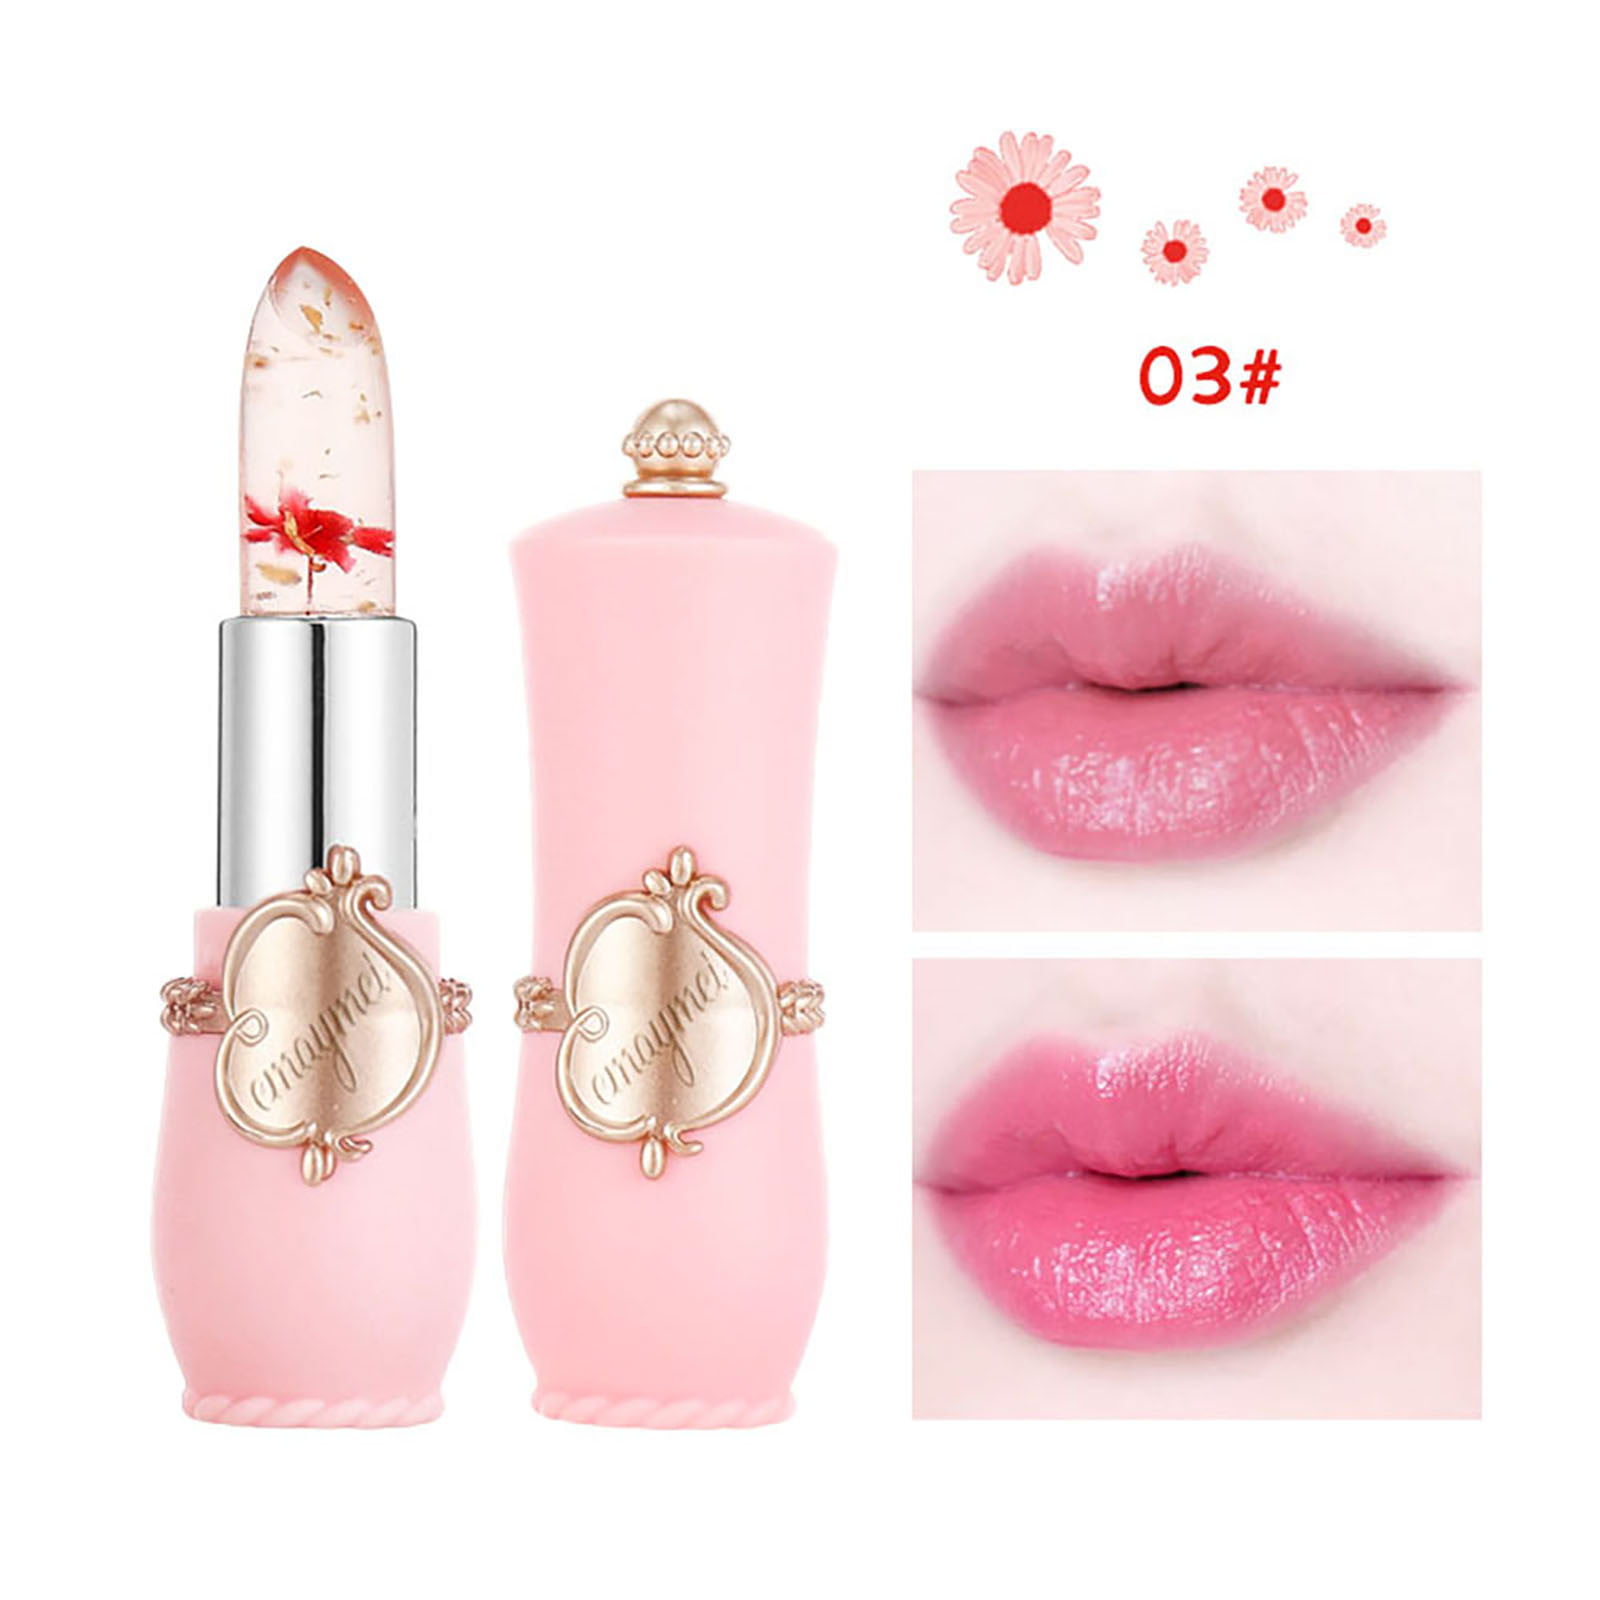 Cara Lady Beauty Bright Flower Crystal Jelly Lipstick Temperature